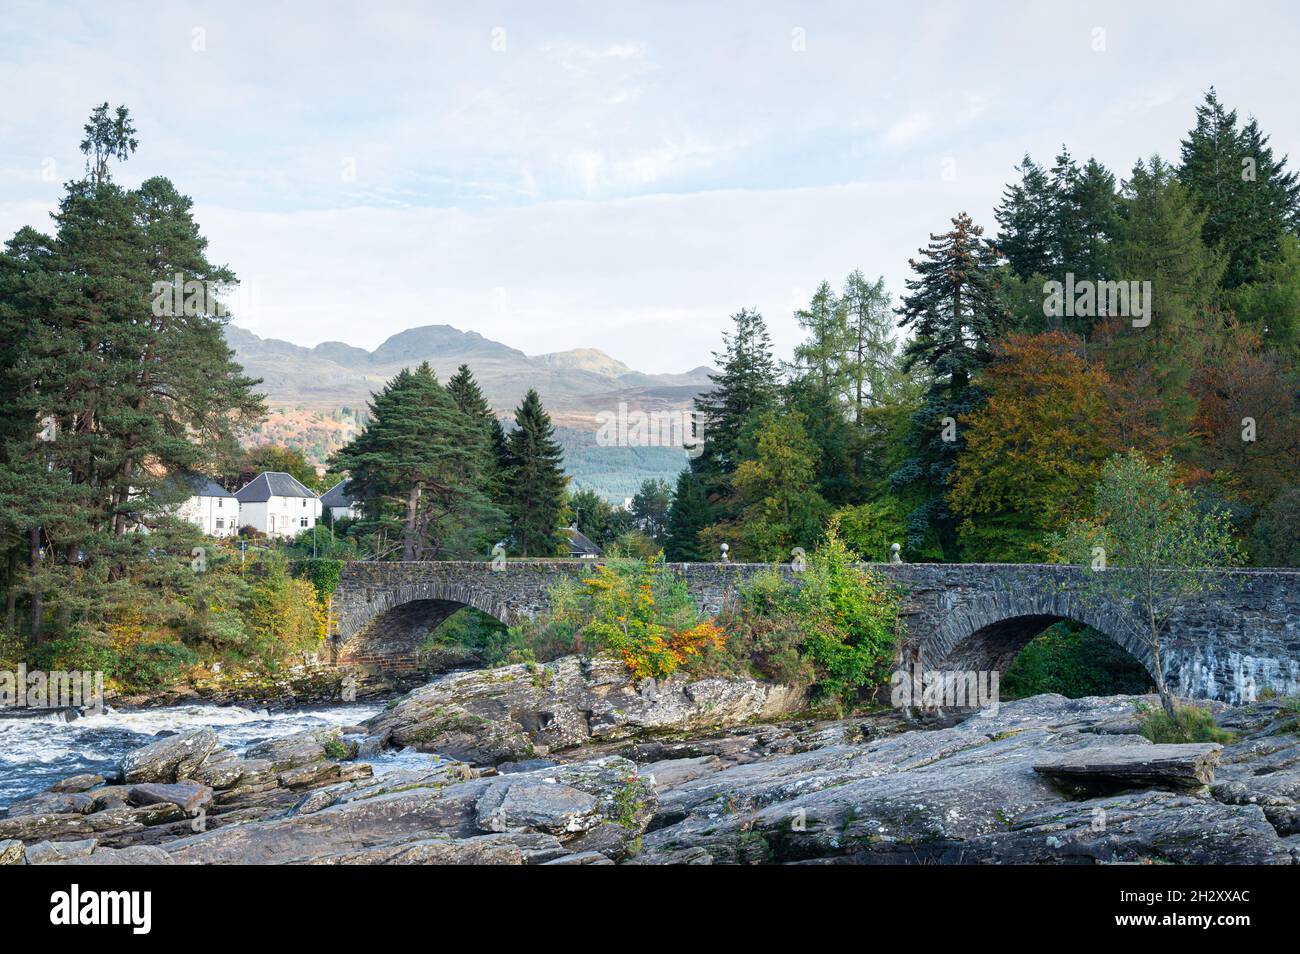 The Bridge of Dochart that traverses the Falls of Dochart in the village of Killin in the Scottish Highlands Stock Photo